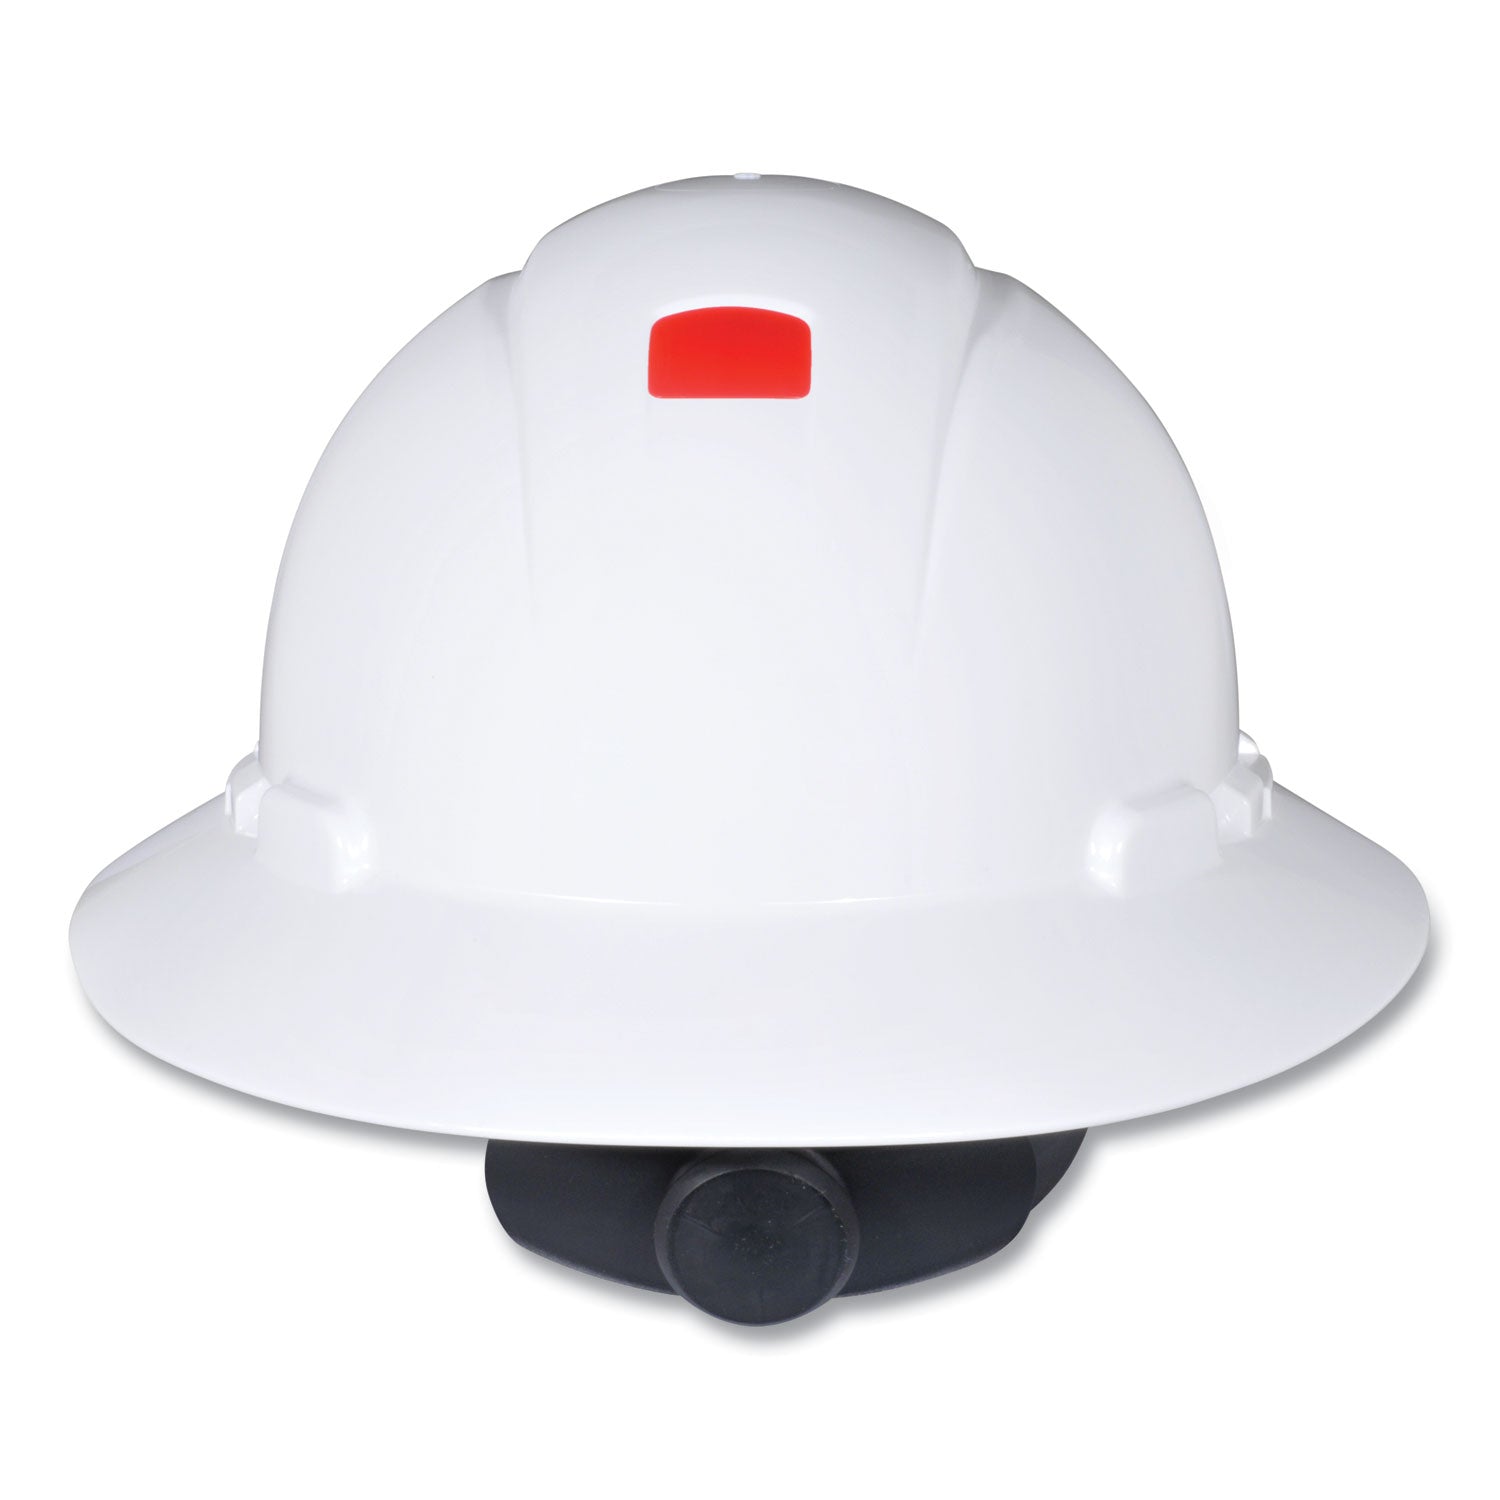 securefit-h-series-hard-hats-h-800-hat-with-uv-indicator-4-point-pressure-diffusion-ratchet-suspension-white_mmmh801sfruv - 1